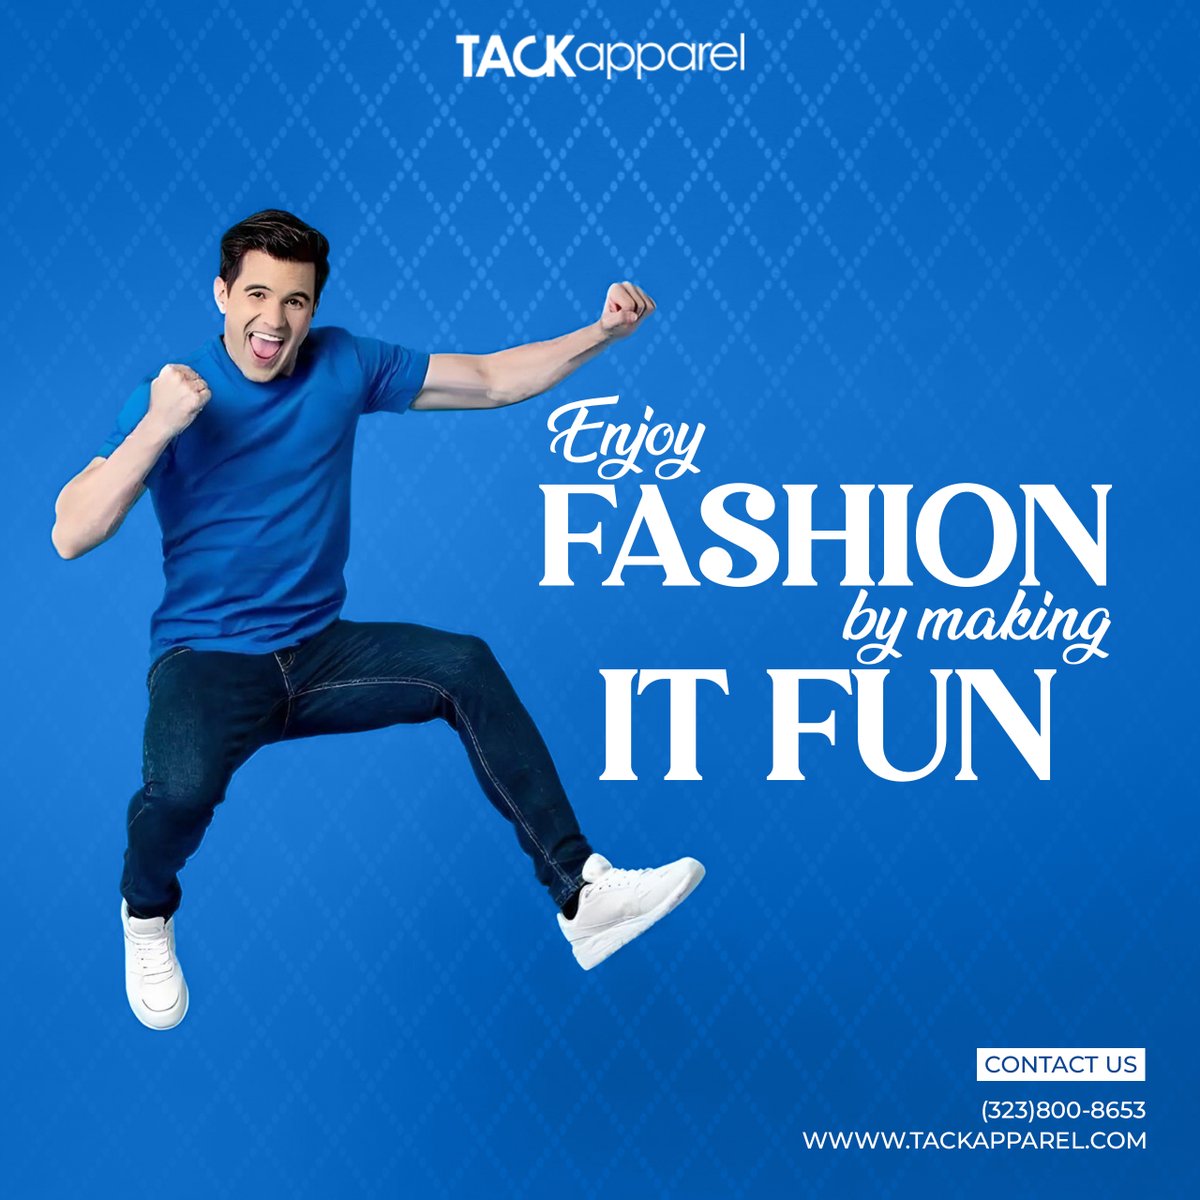 Tack Apparel designs clothing with comfort and style in mind.

#Tackapparel #fashion #summer #apparel #style #shirtmanufacturer #customshirt #custompants